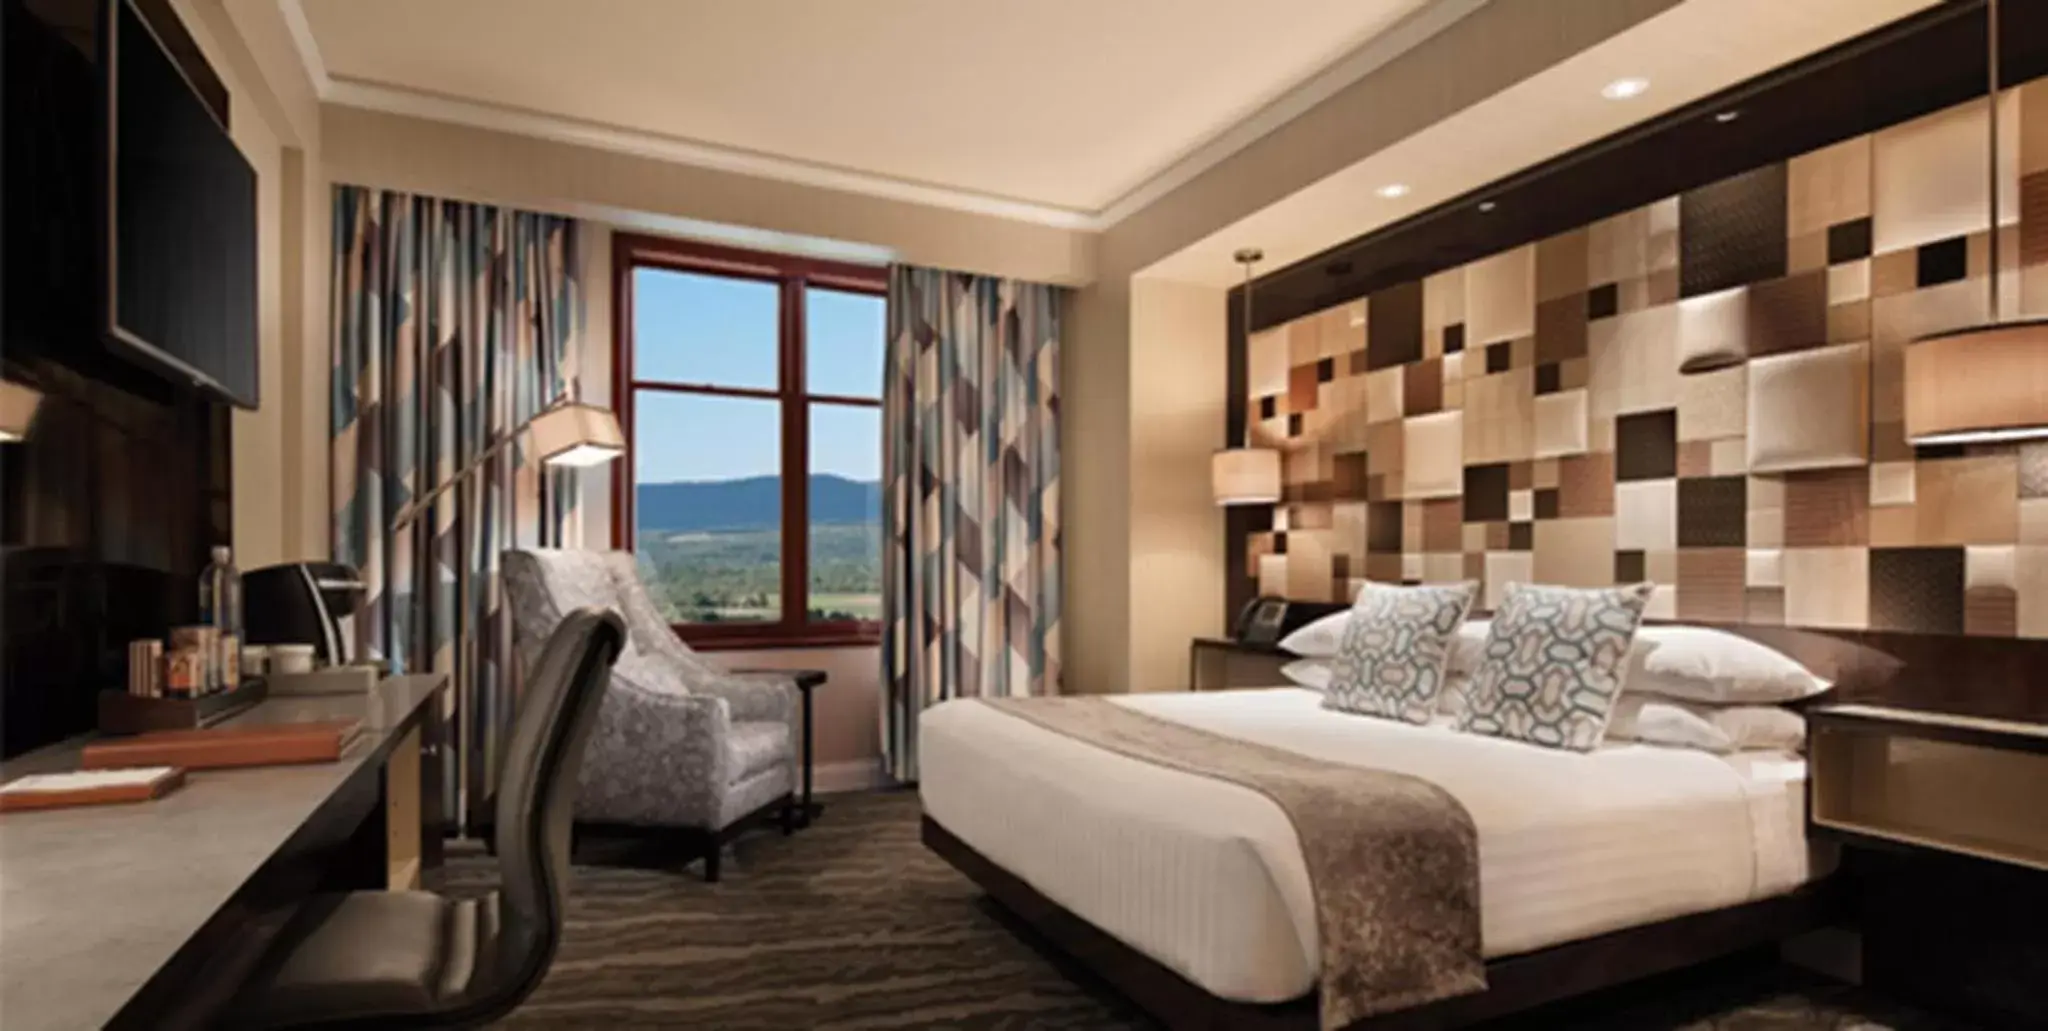 Deluxe King Room in Mount Airy Casino and Resort - Adults Only